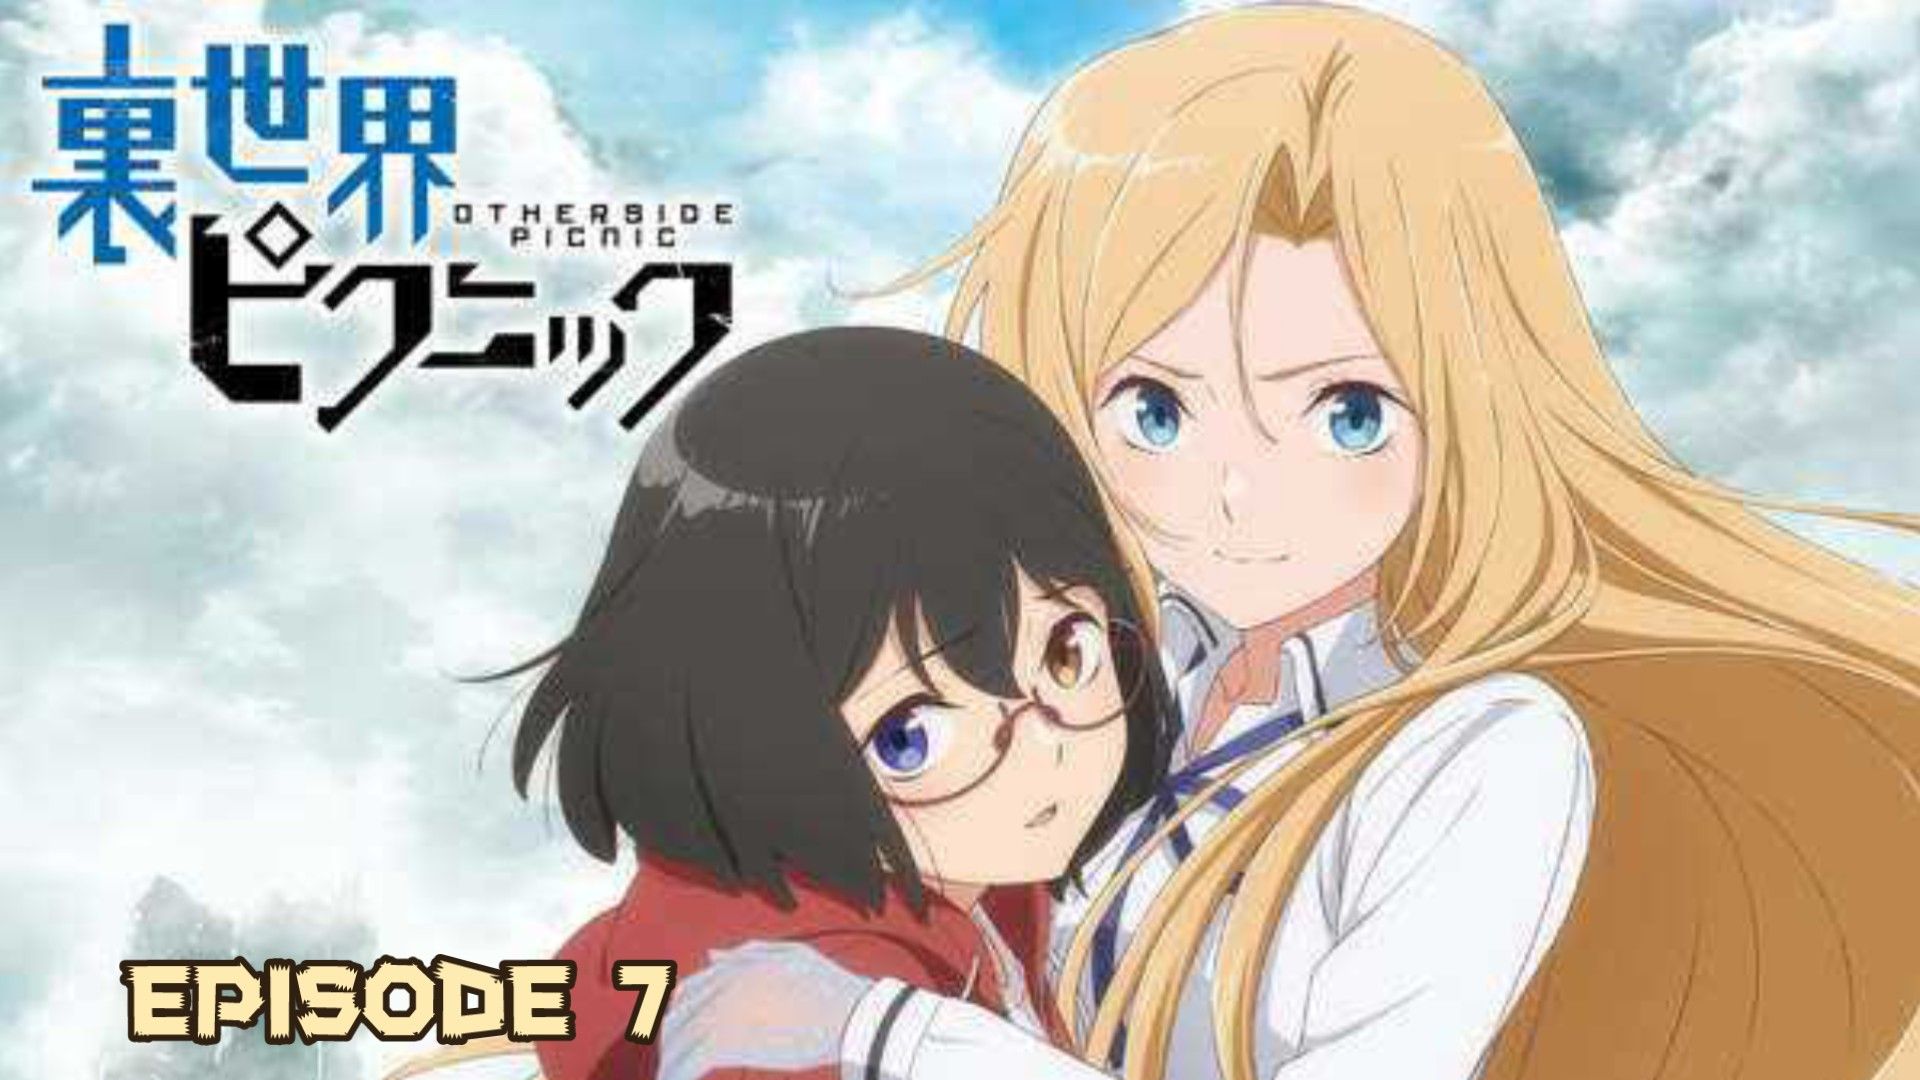 Otherside Picnic Episode 7 - Holiday! - I drink and watch anime